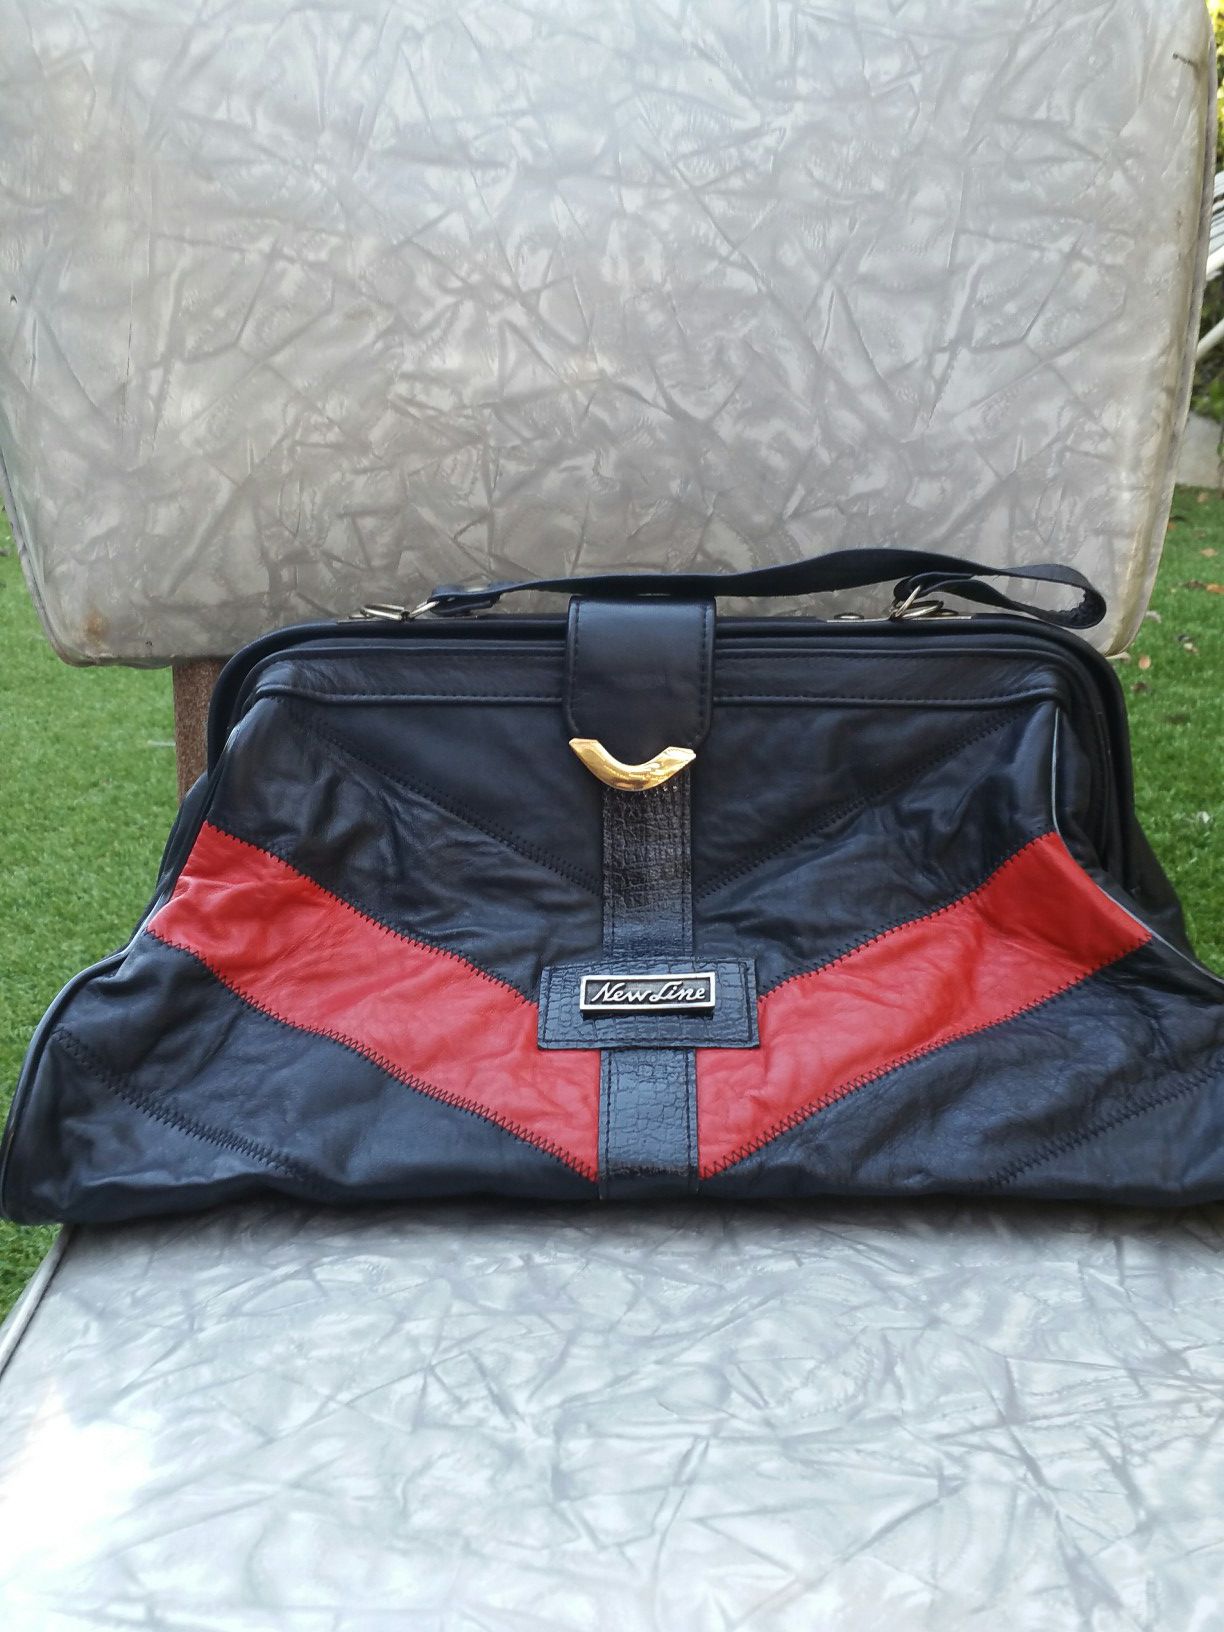 Structured 1980s bag